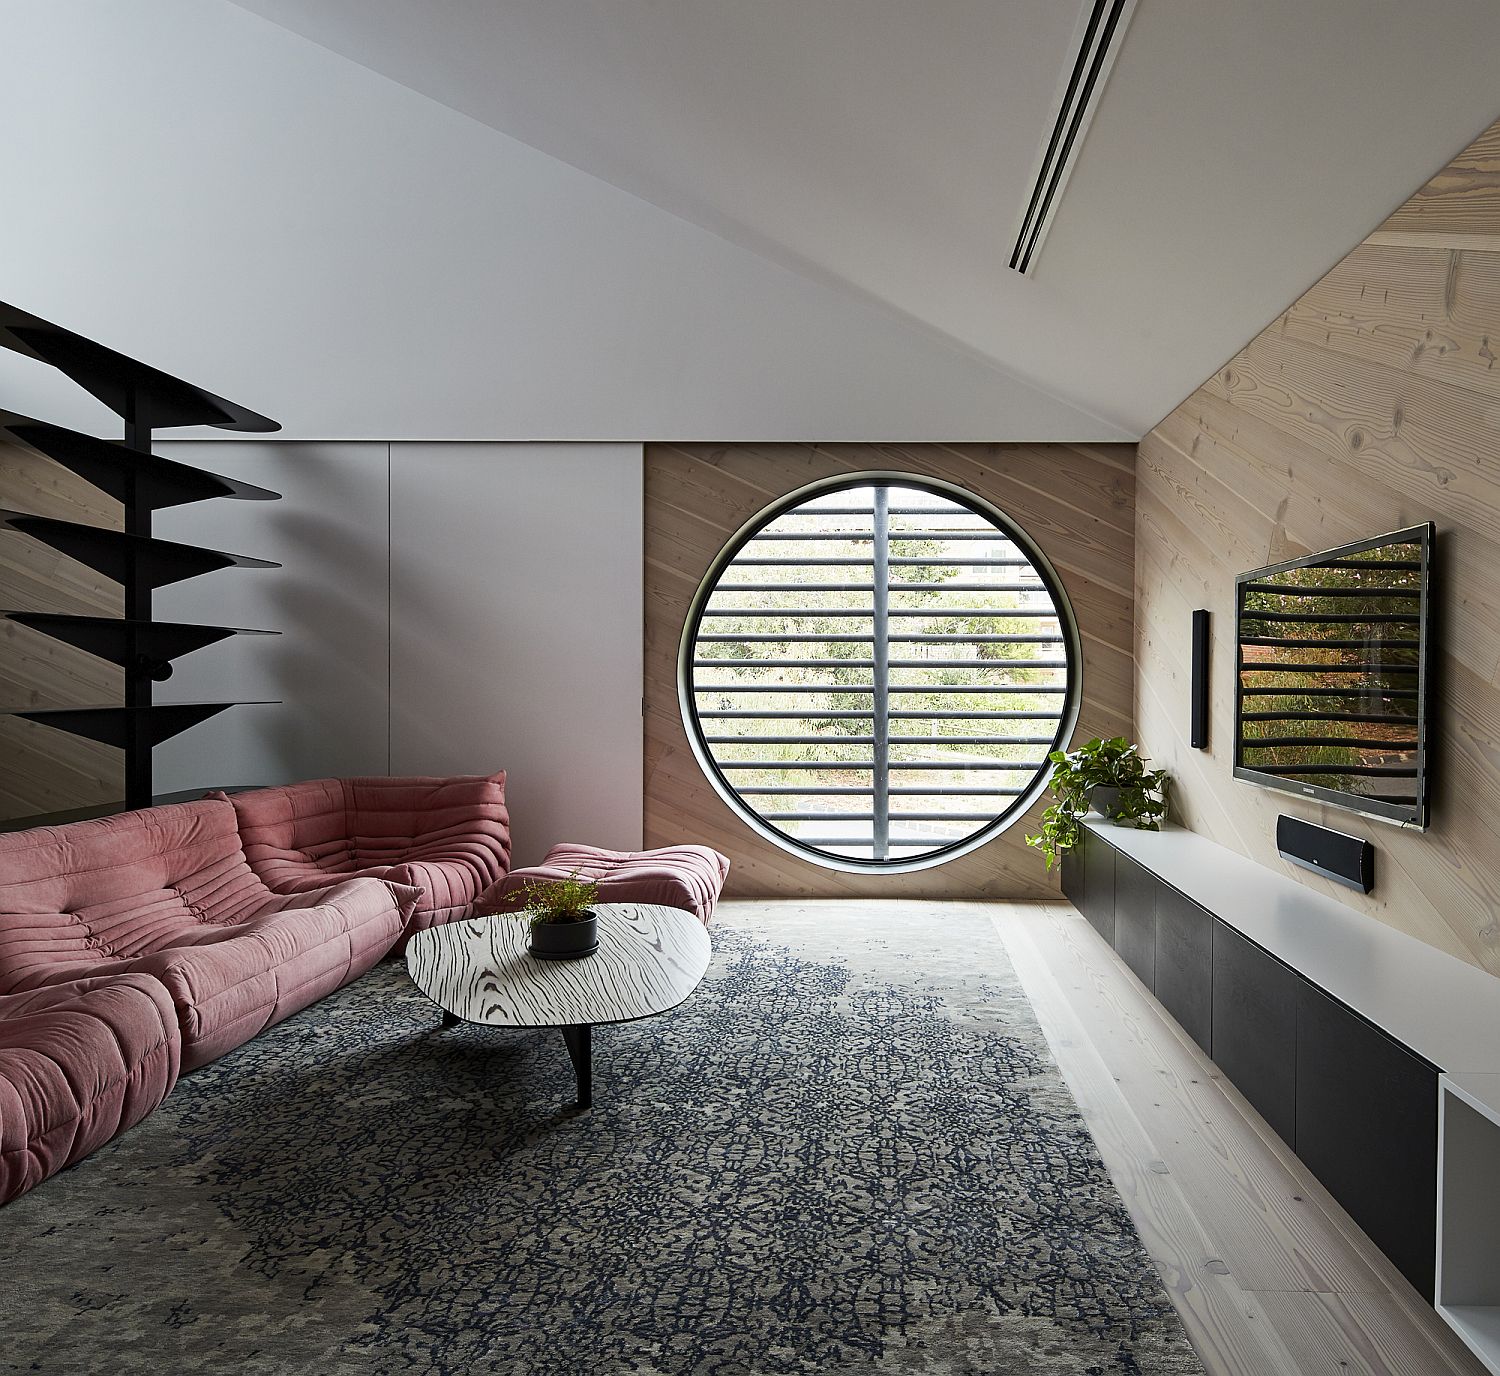 Round window and plush pink sofa add a different dynamic to the room